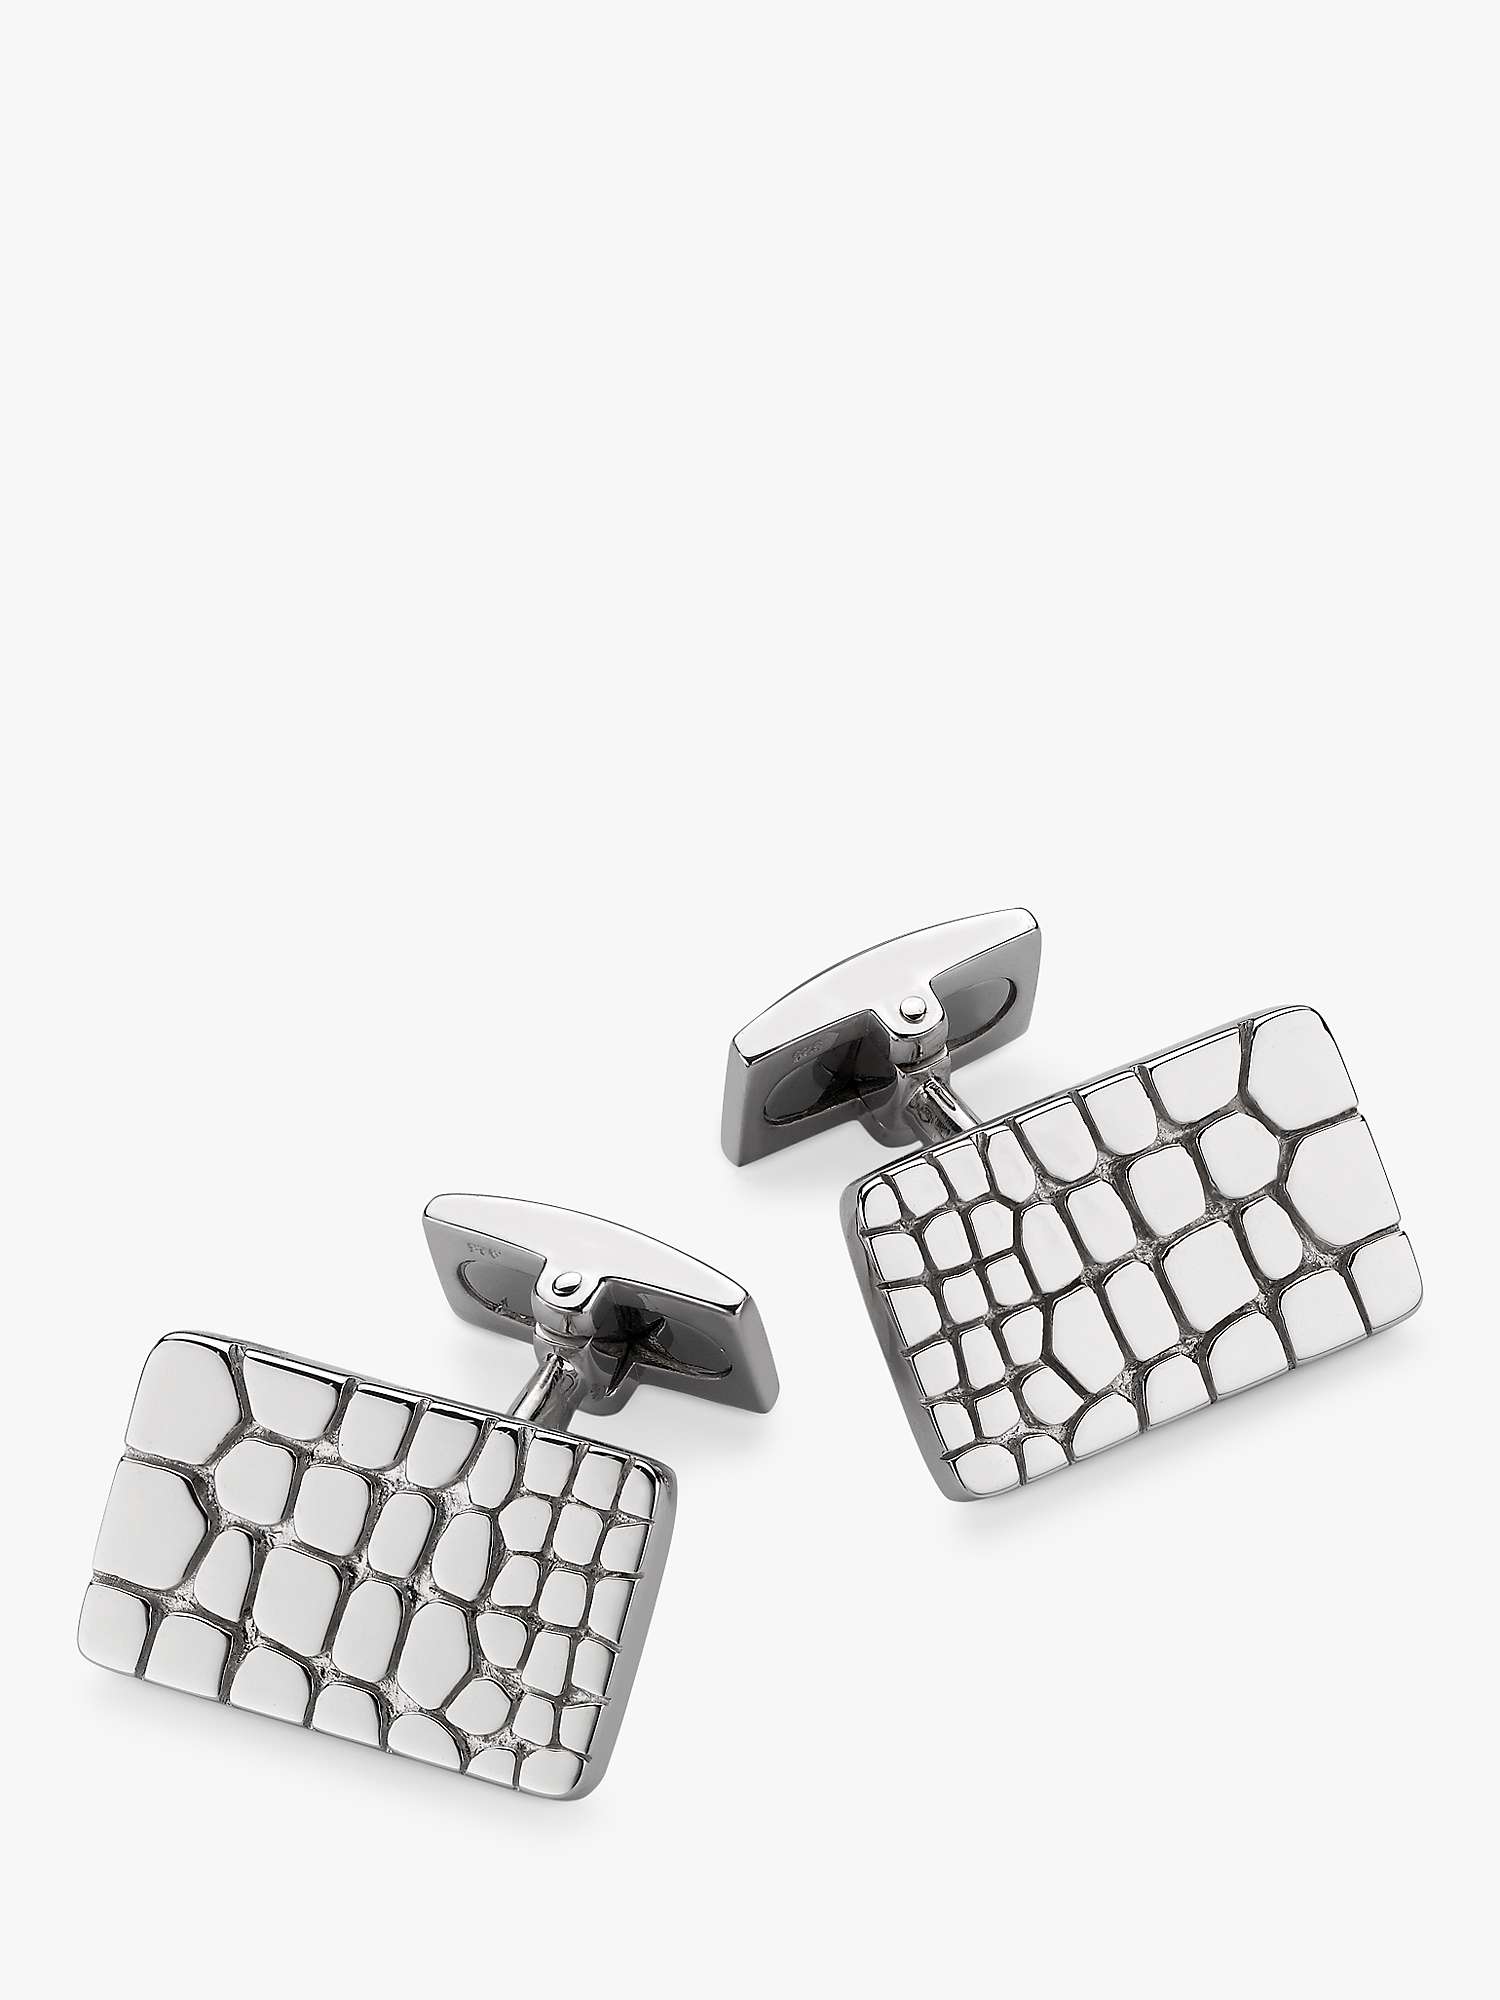 Buy Hoxton London Crocodile Patterned Rectangle Cufflinks, Silver Online at johnlewis.com